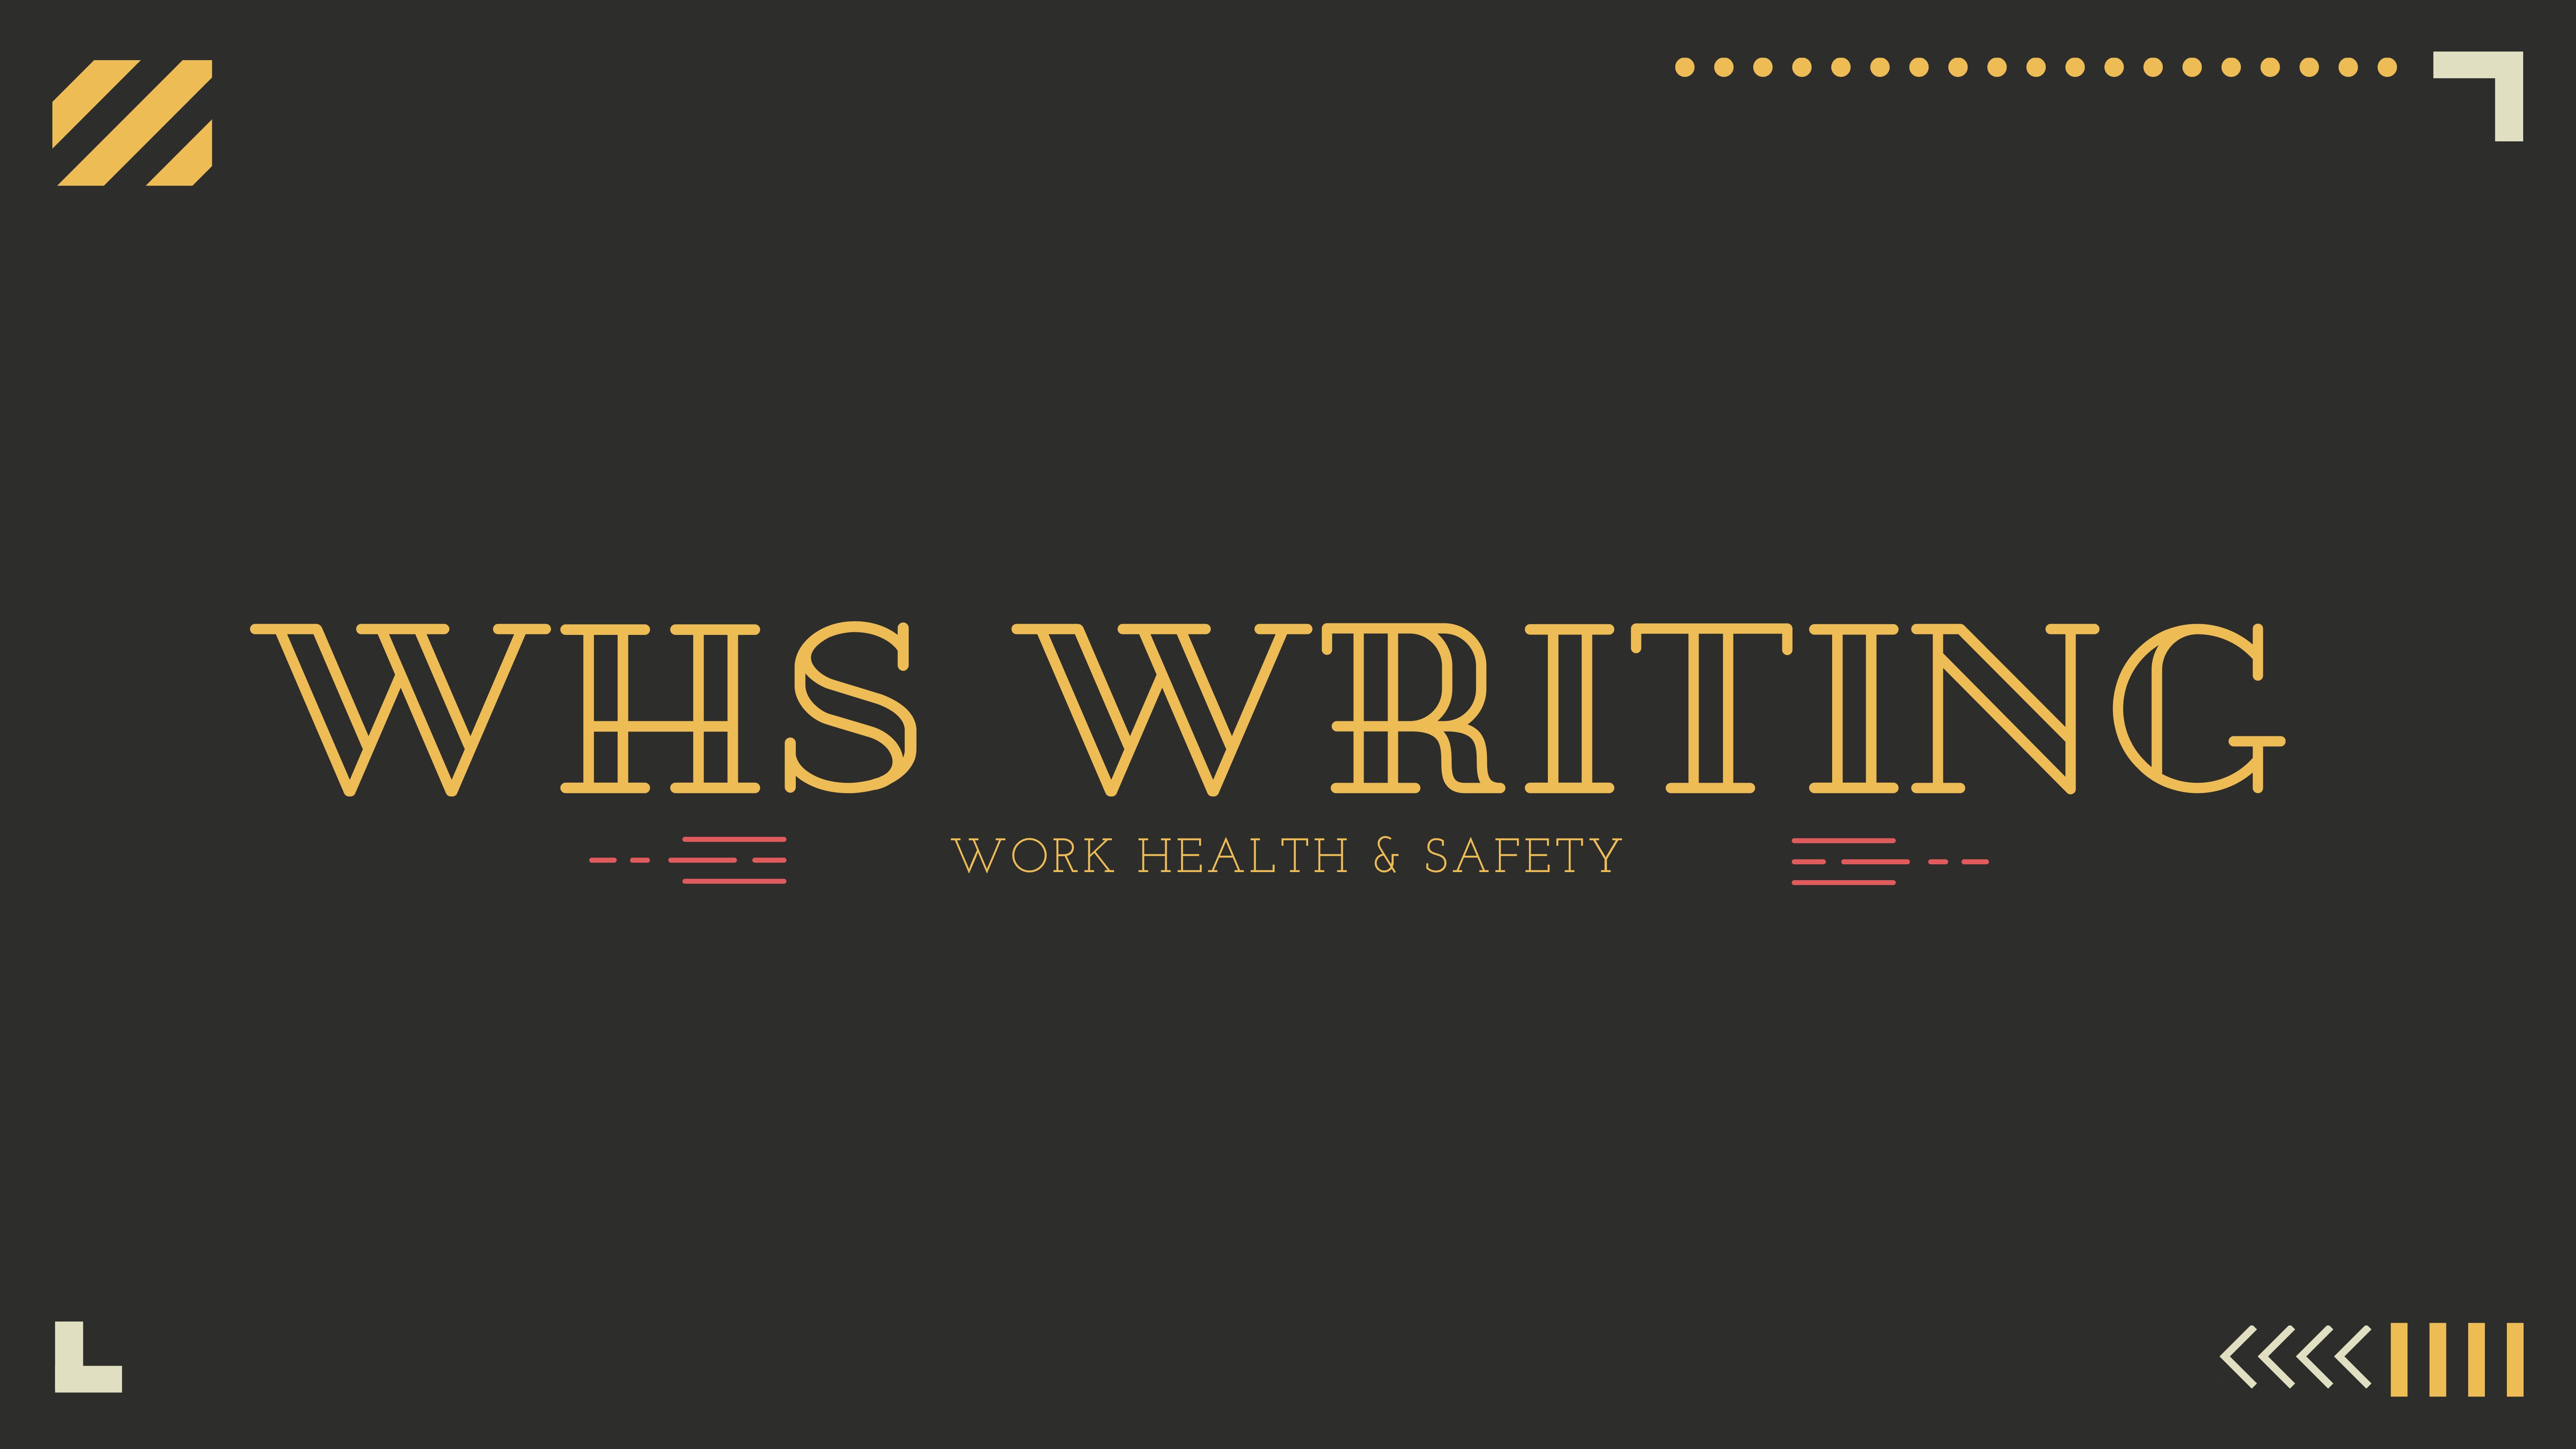 WHS writing and compliance